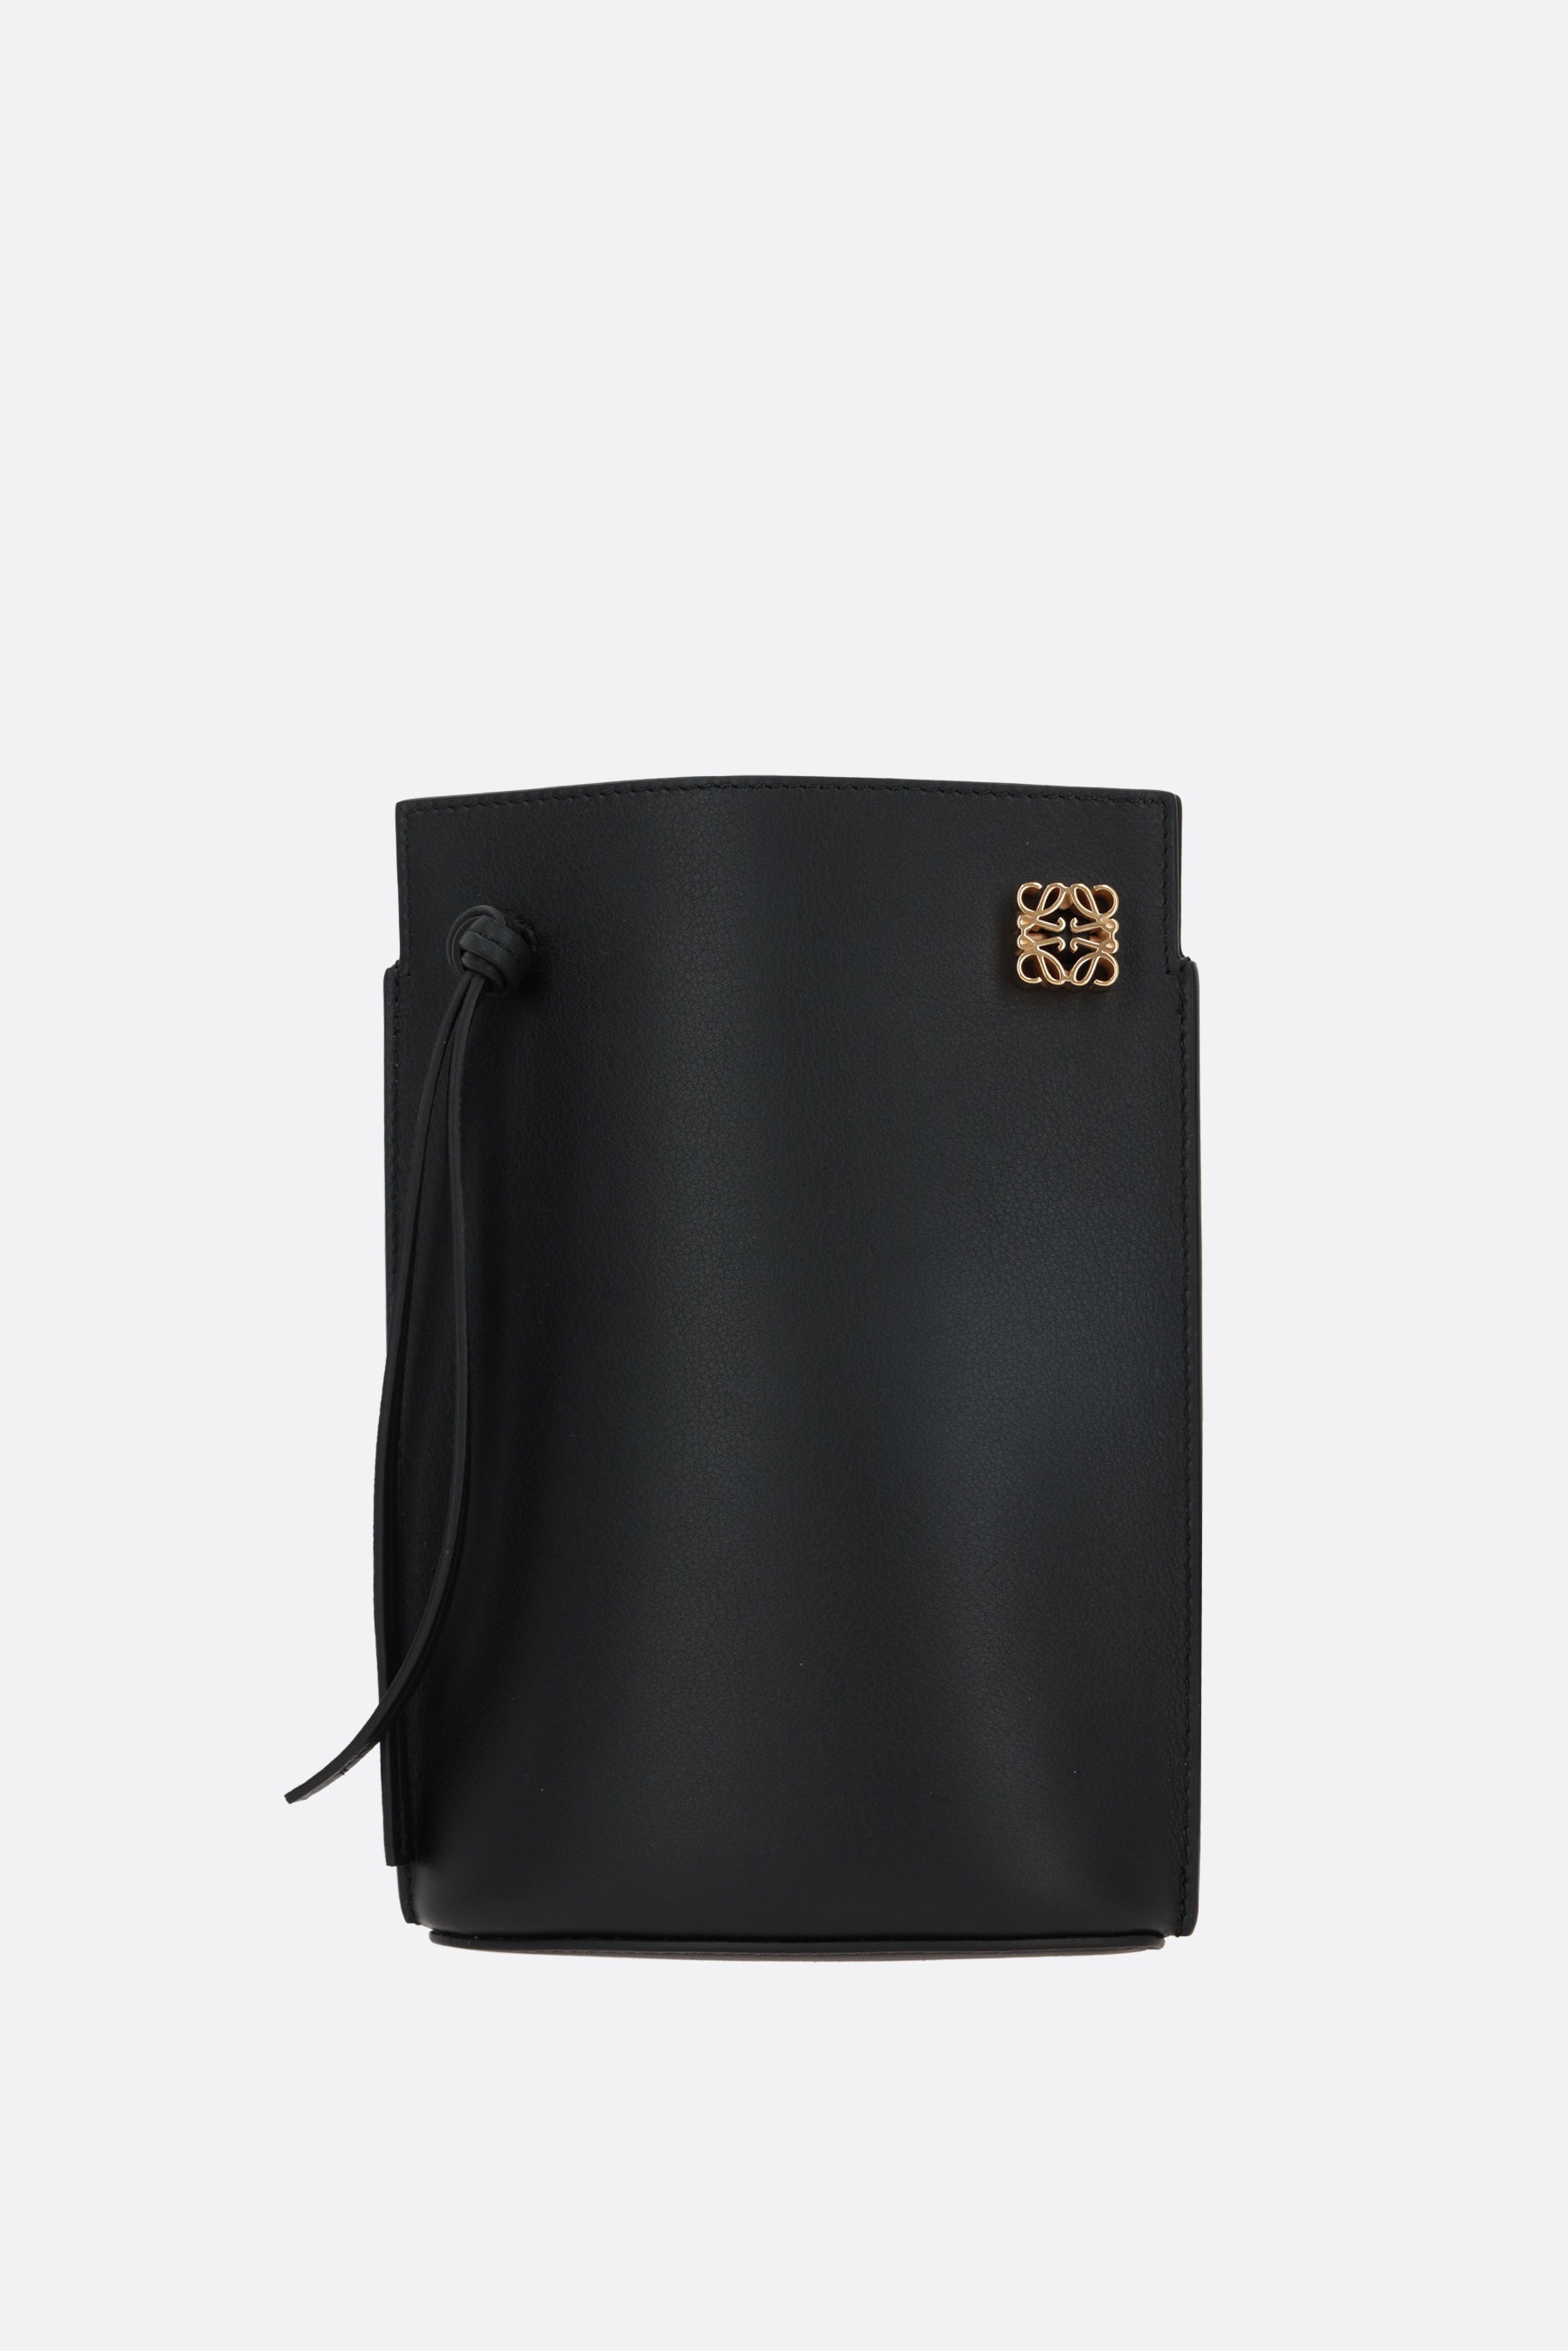 DICE CROSSBODY BAG IN CLASSIC LEATHER - 1